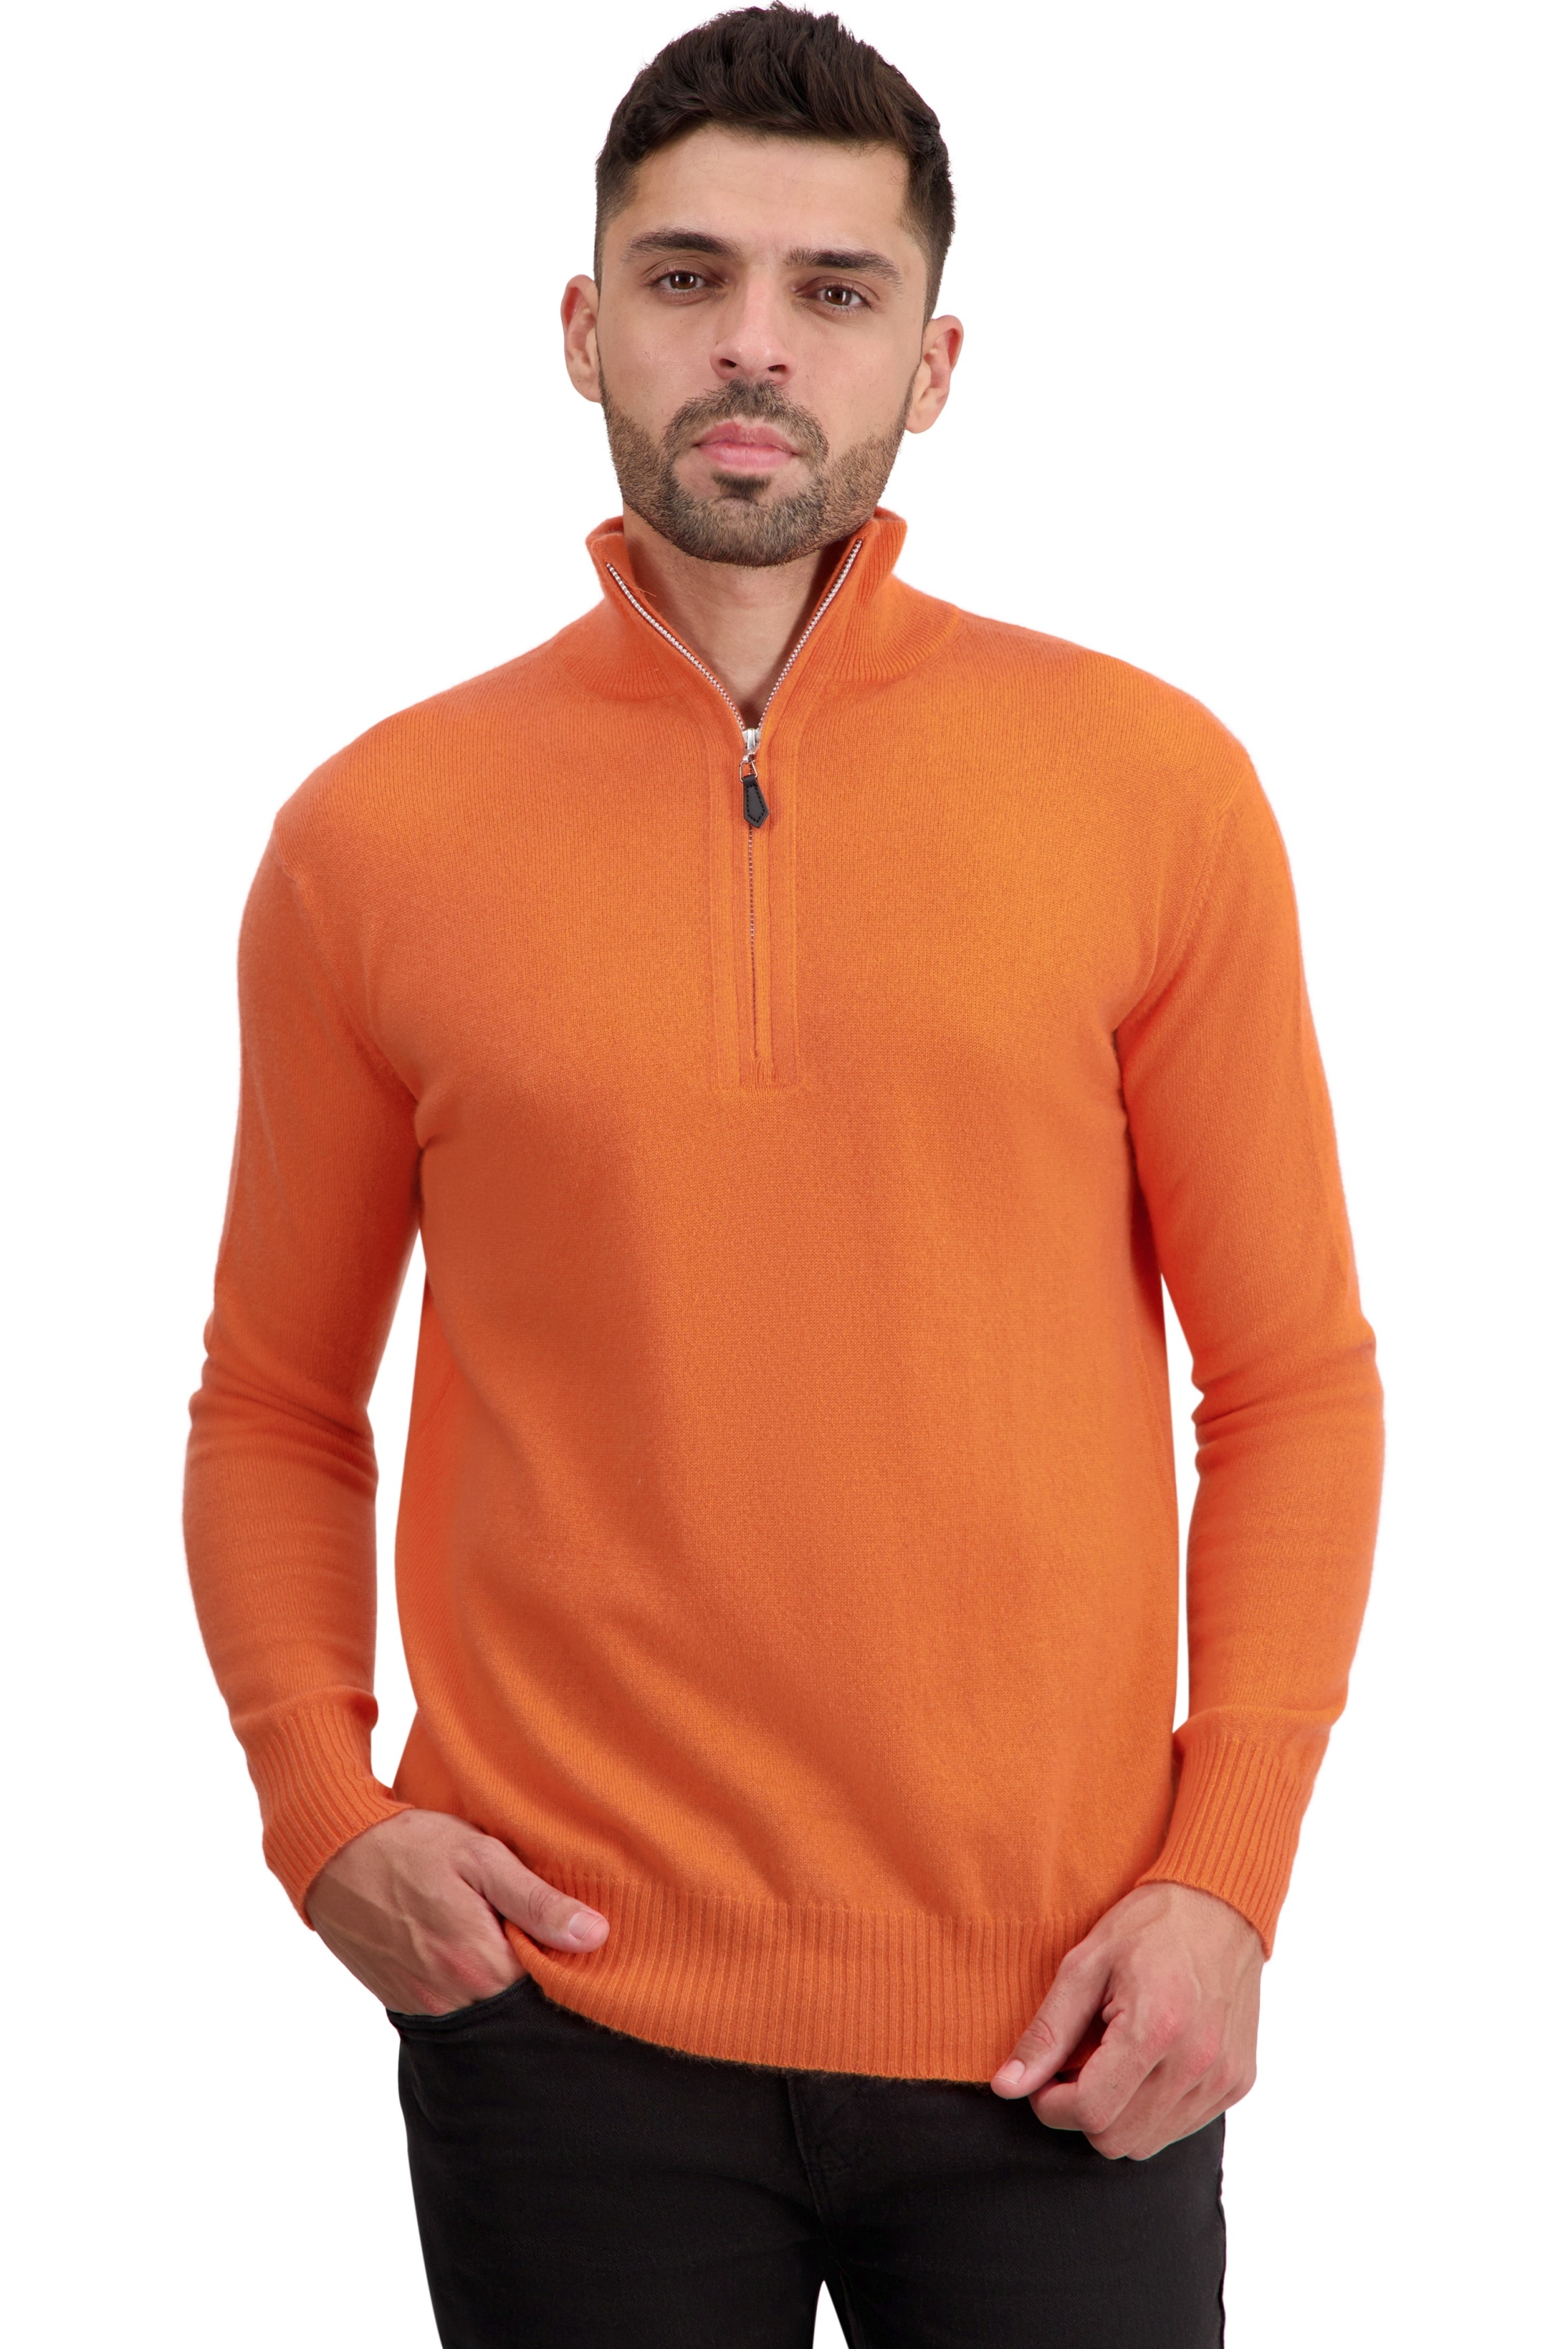 Cachemire petits prix homme toulon first nectarine 3xl